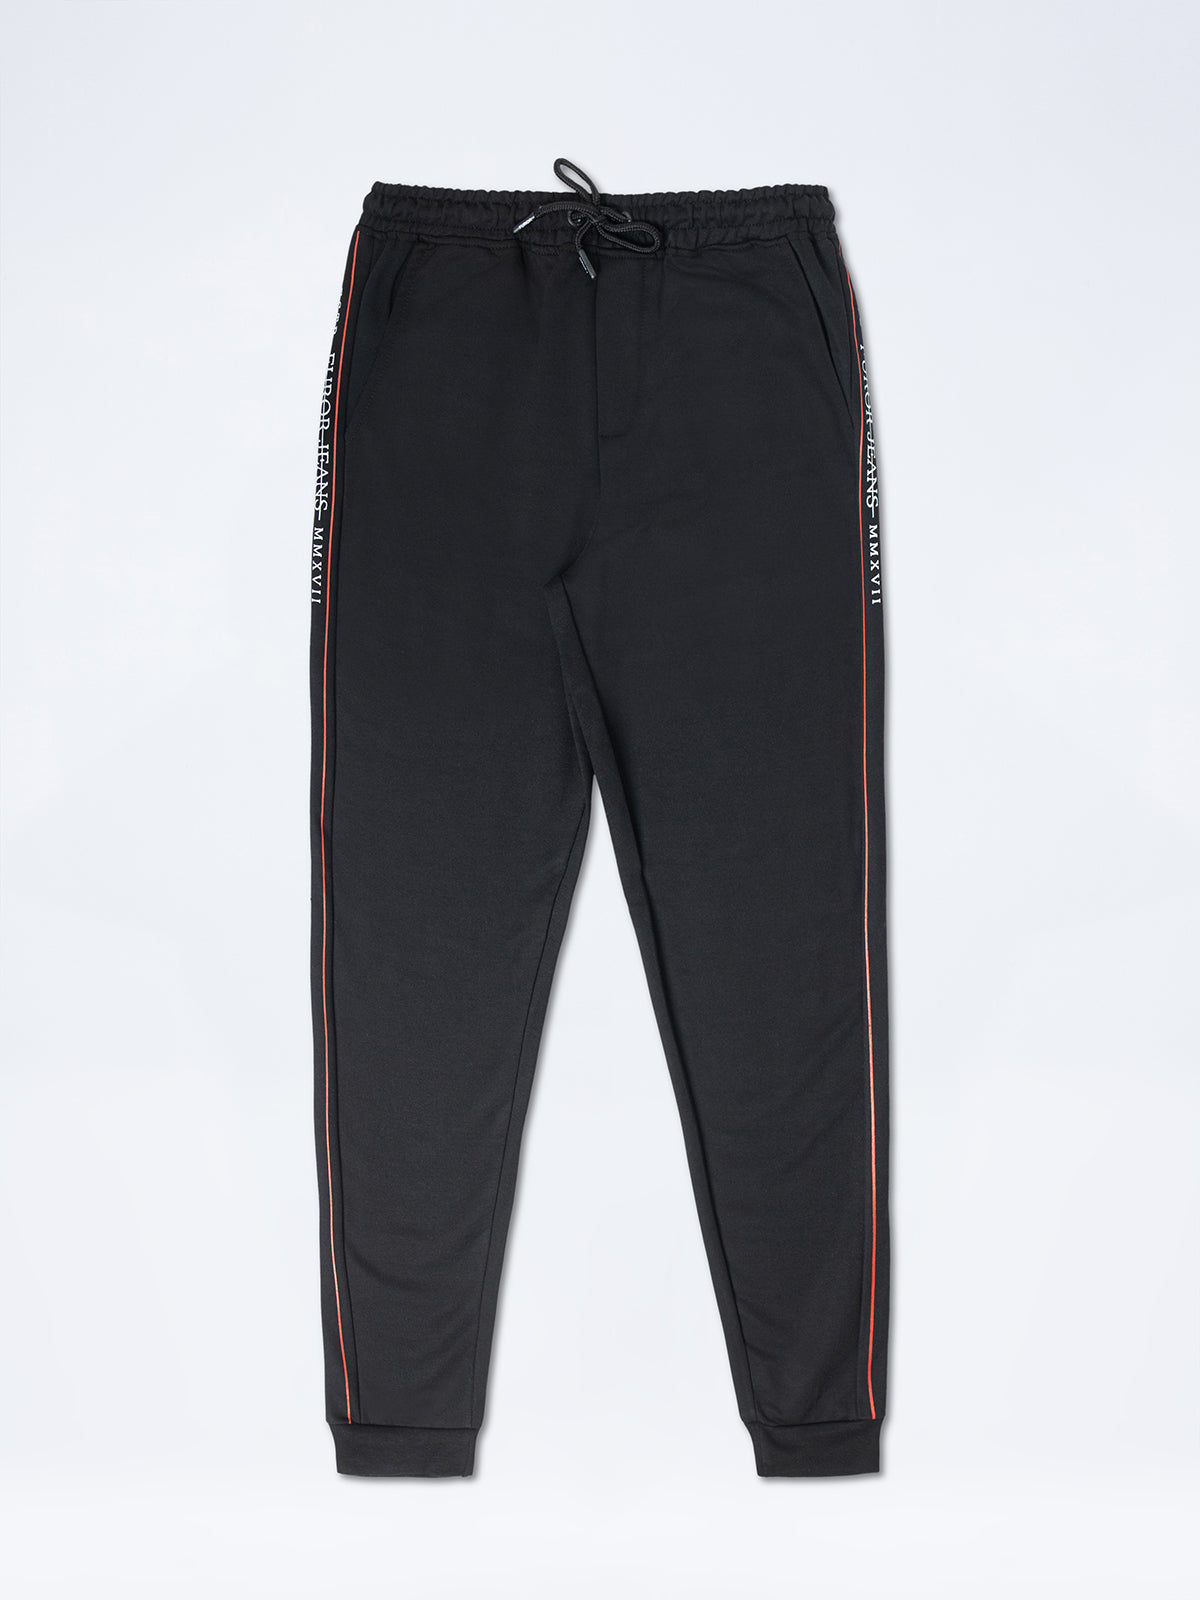 French Terry Jog Pant - FMBT24-013